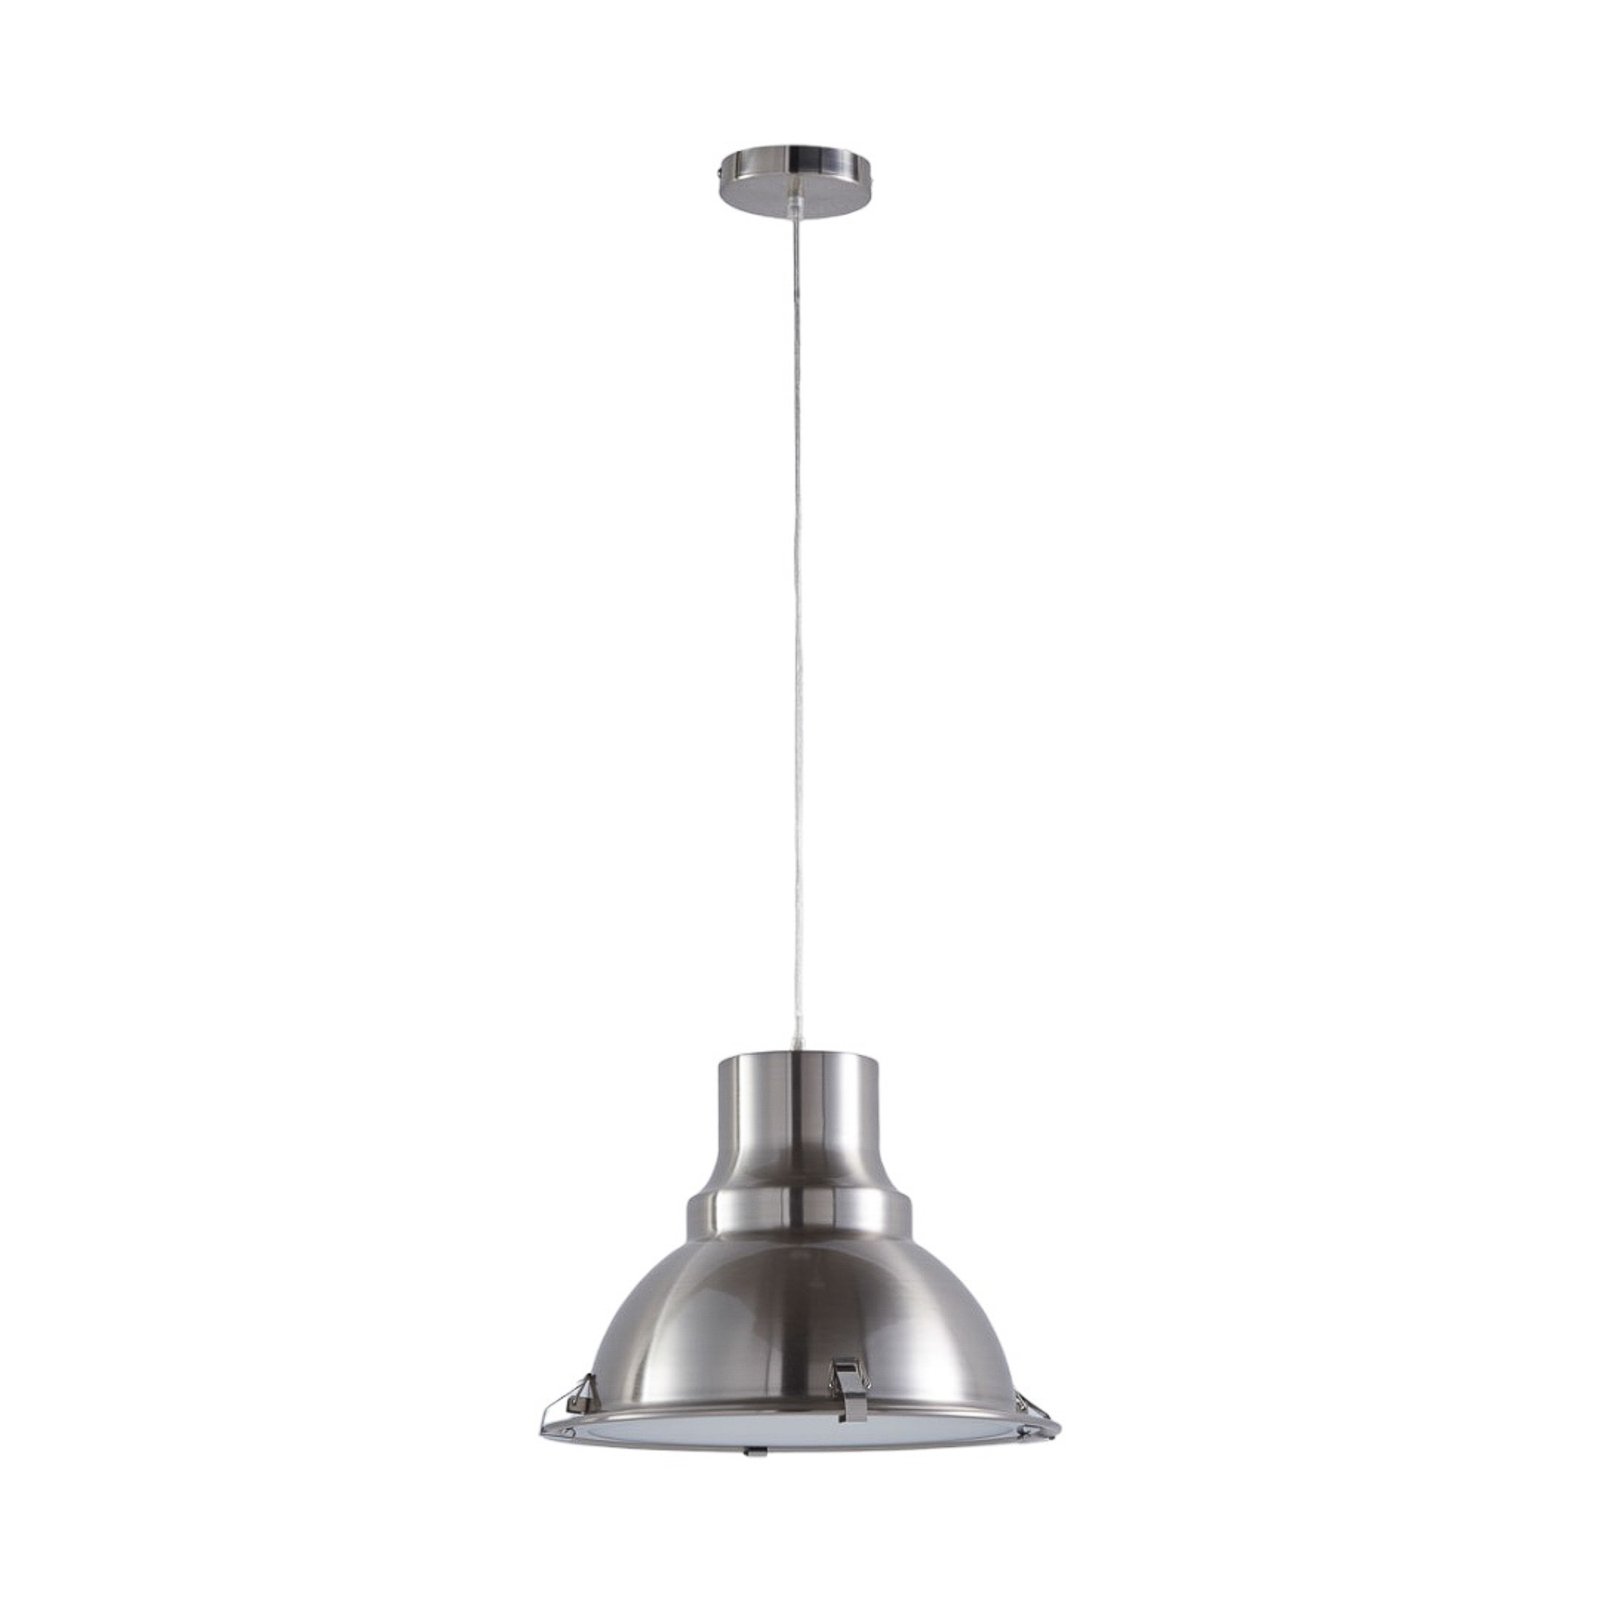 Industrial-looking pendant lamp Letty